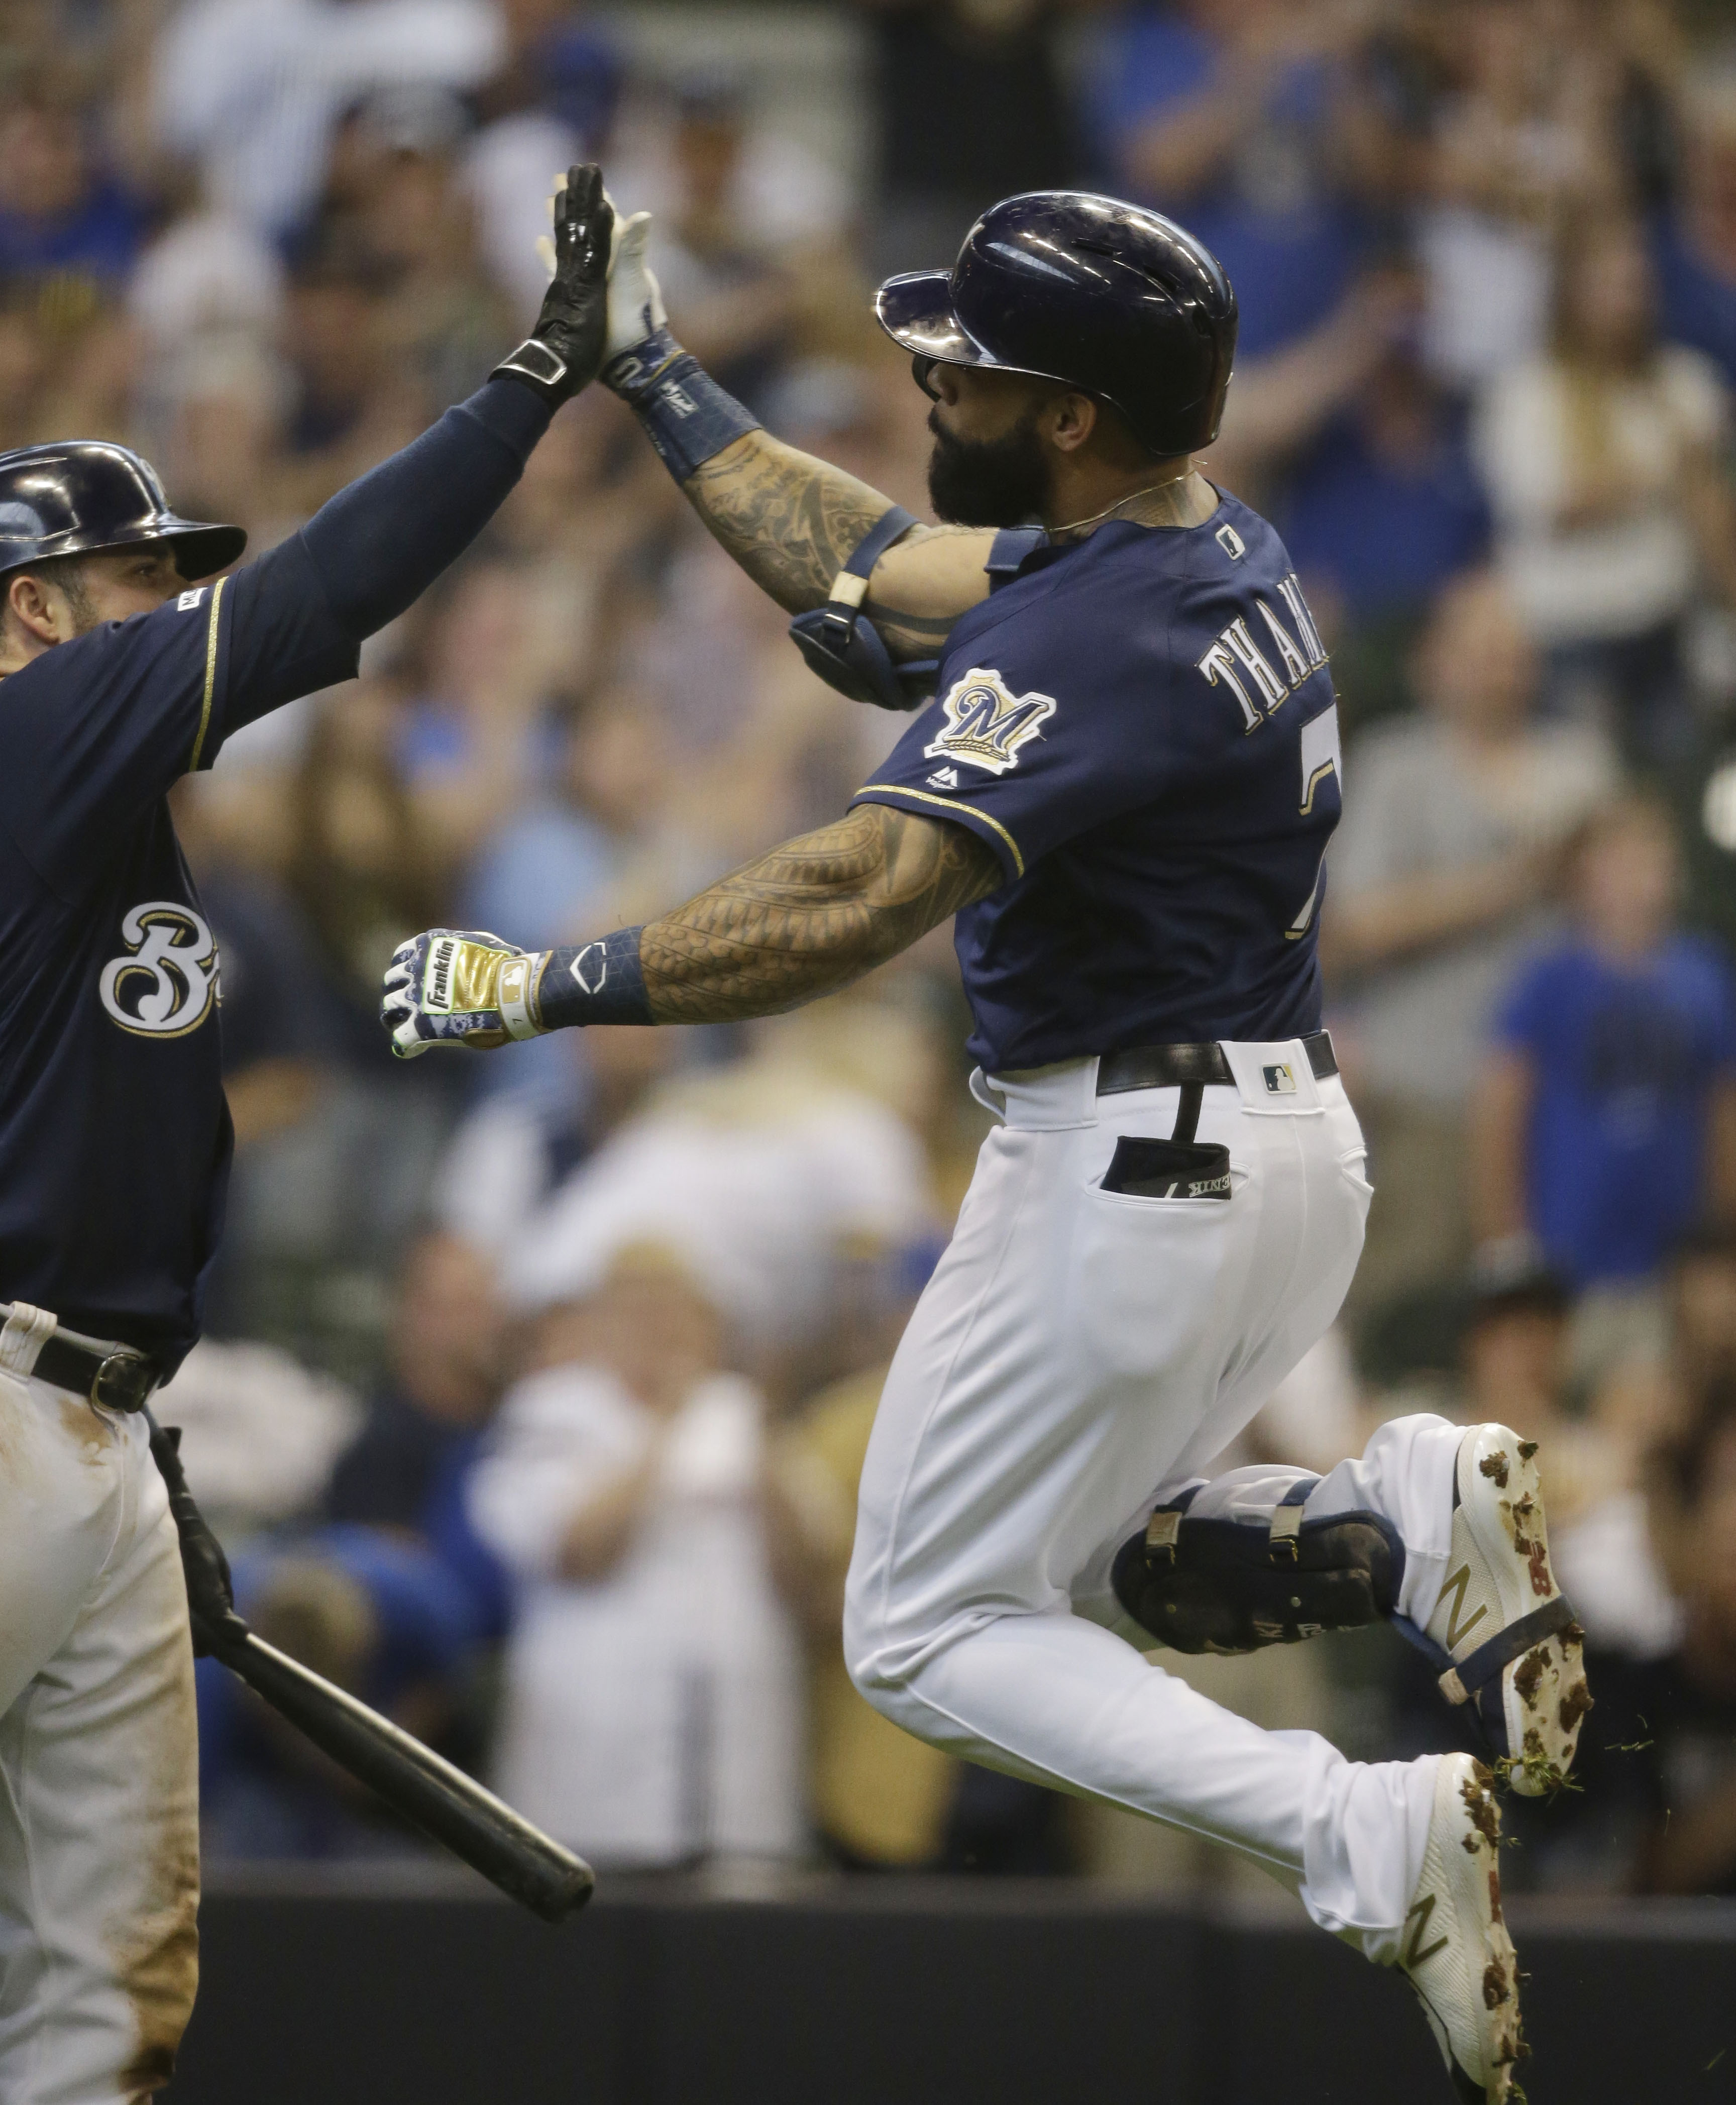 Brewers slip past Pirates 2-1 on Thames' homer in 8th